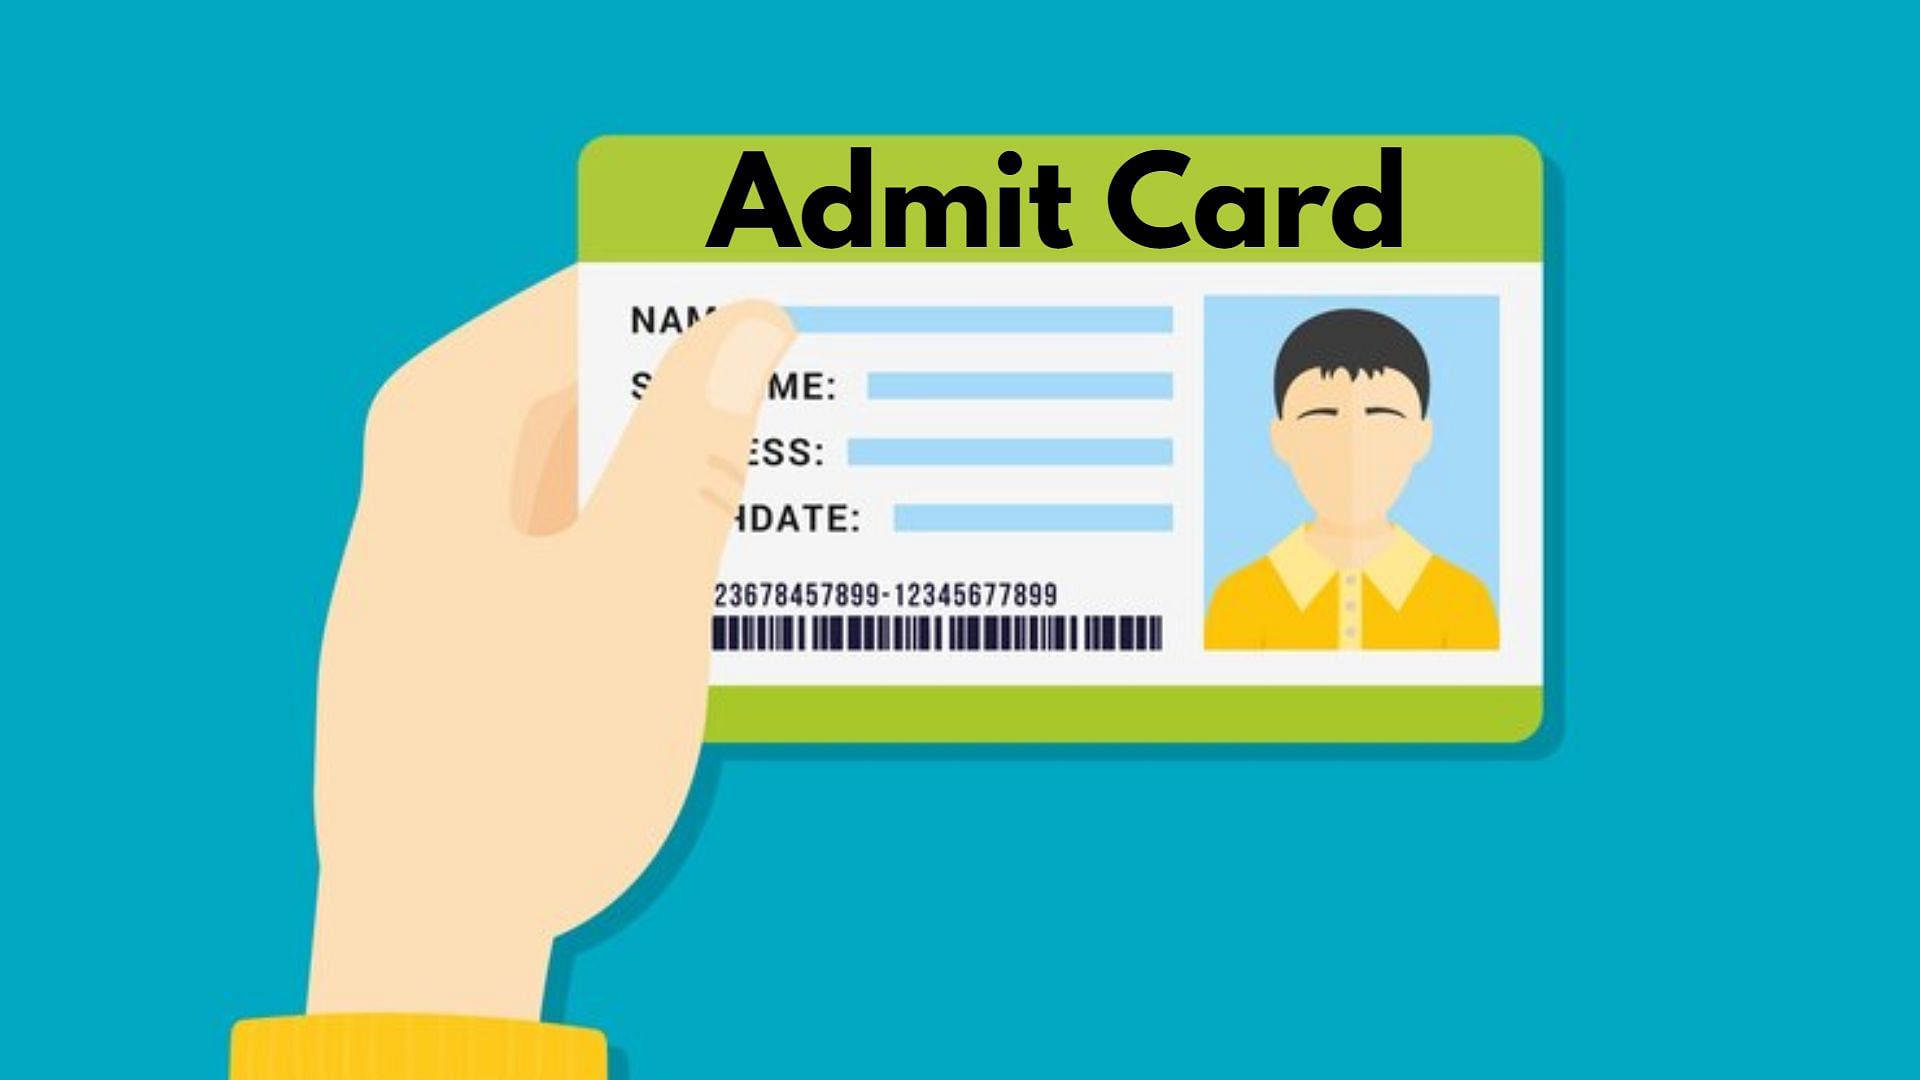 RPSC AE Mechanical 2023 admit card released, Check steps to download hall ticket here